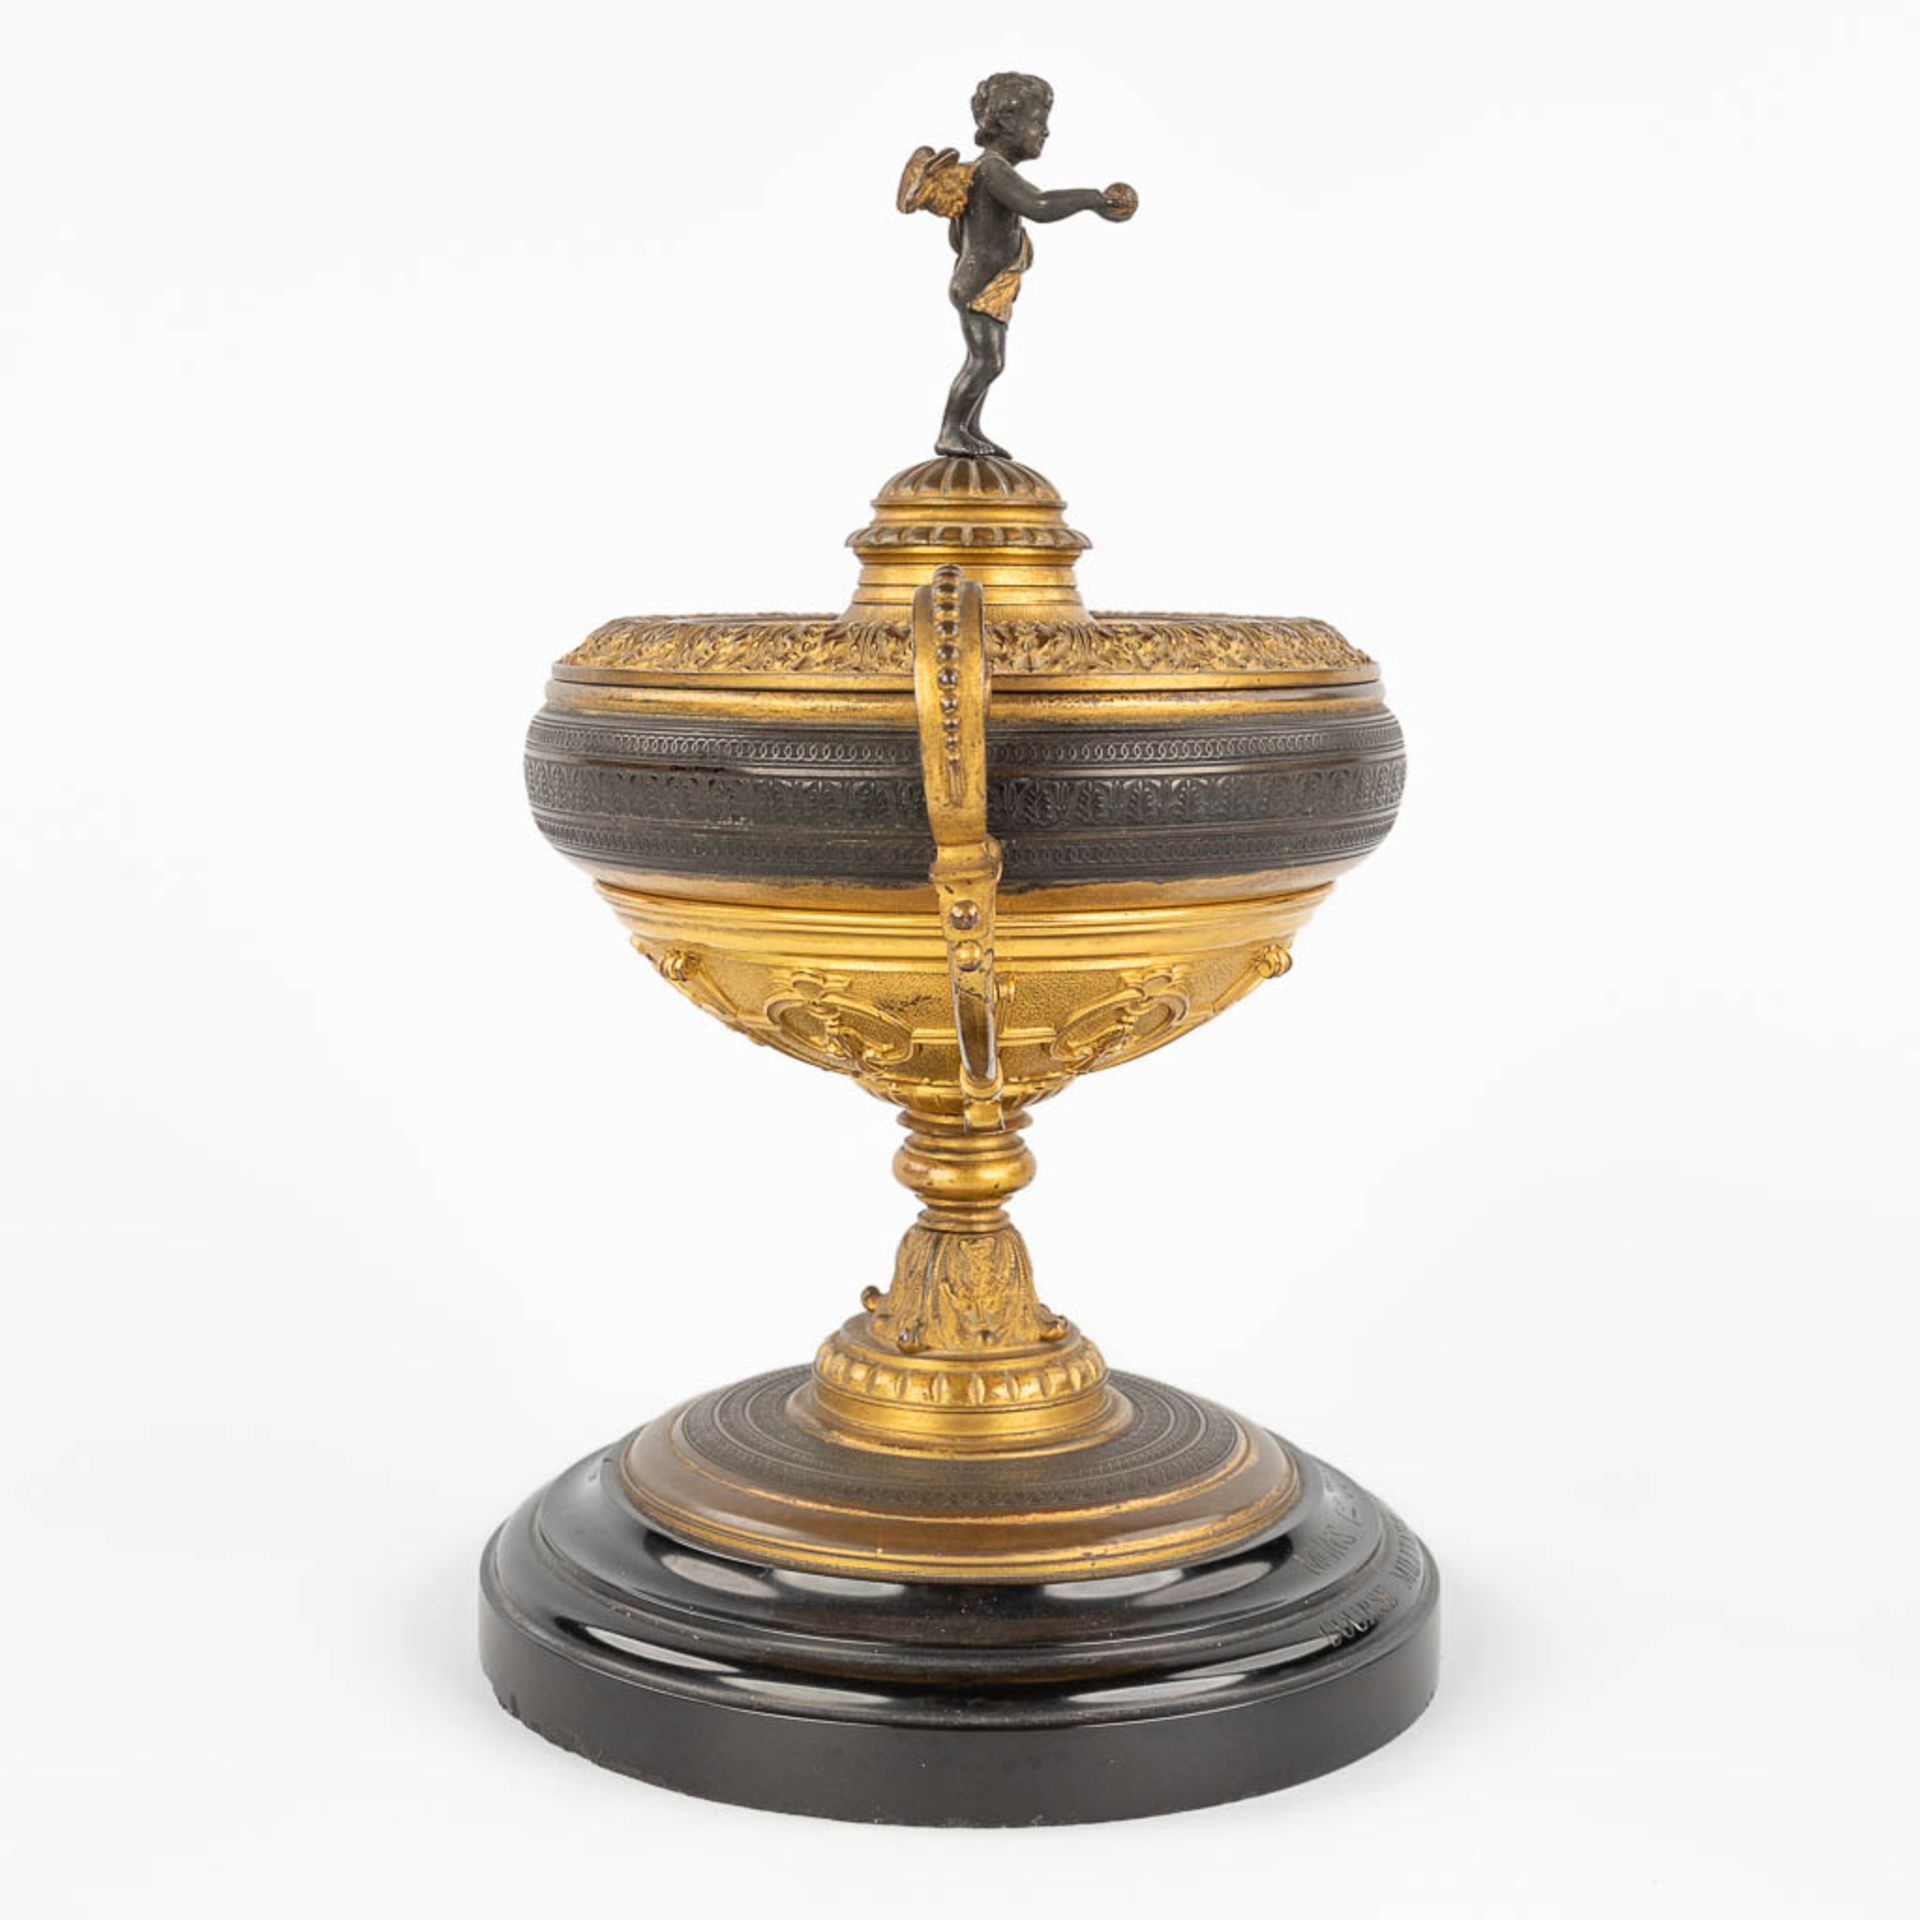 An antique trophy, made of gilt and patinated bronze. 19th C. (L: 16 x W: 22 x H: 27 cm) - Image 4 of 14